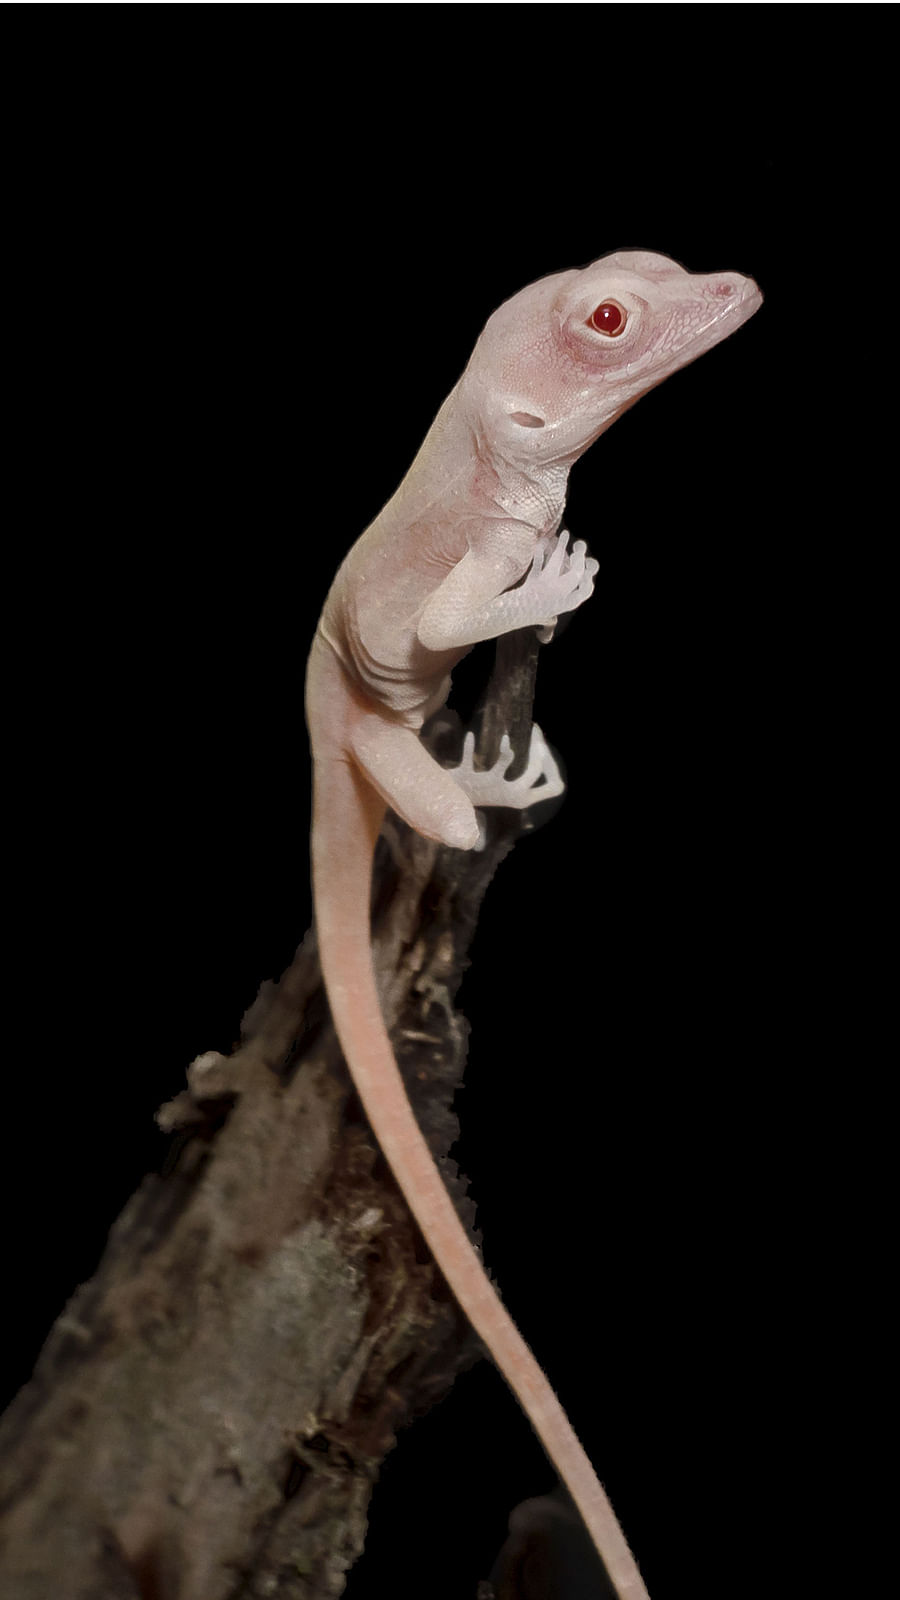 This undated handout photo obtained 27 August 2019 courtesy of Doug Menke and the University of Georgia shows an albino lizard. Photo: AFP